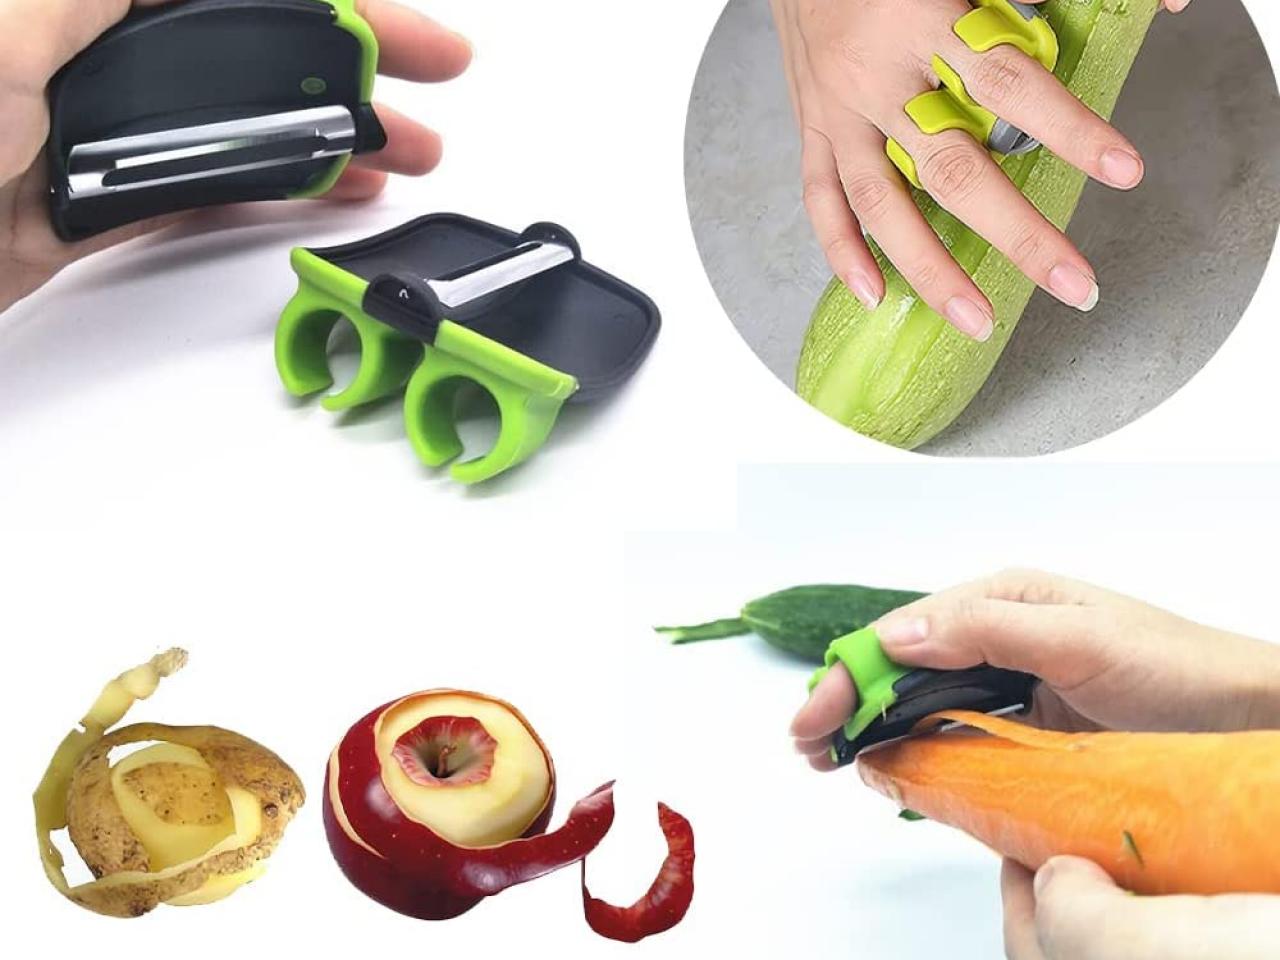 20+ Cheap and Handy Kitchen Gadgets That You Might Want to Add to